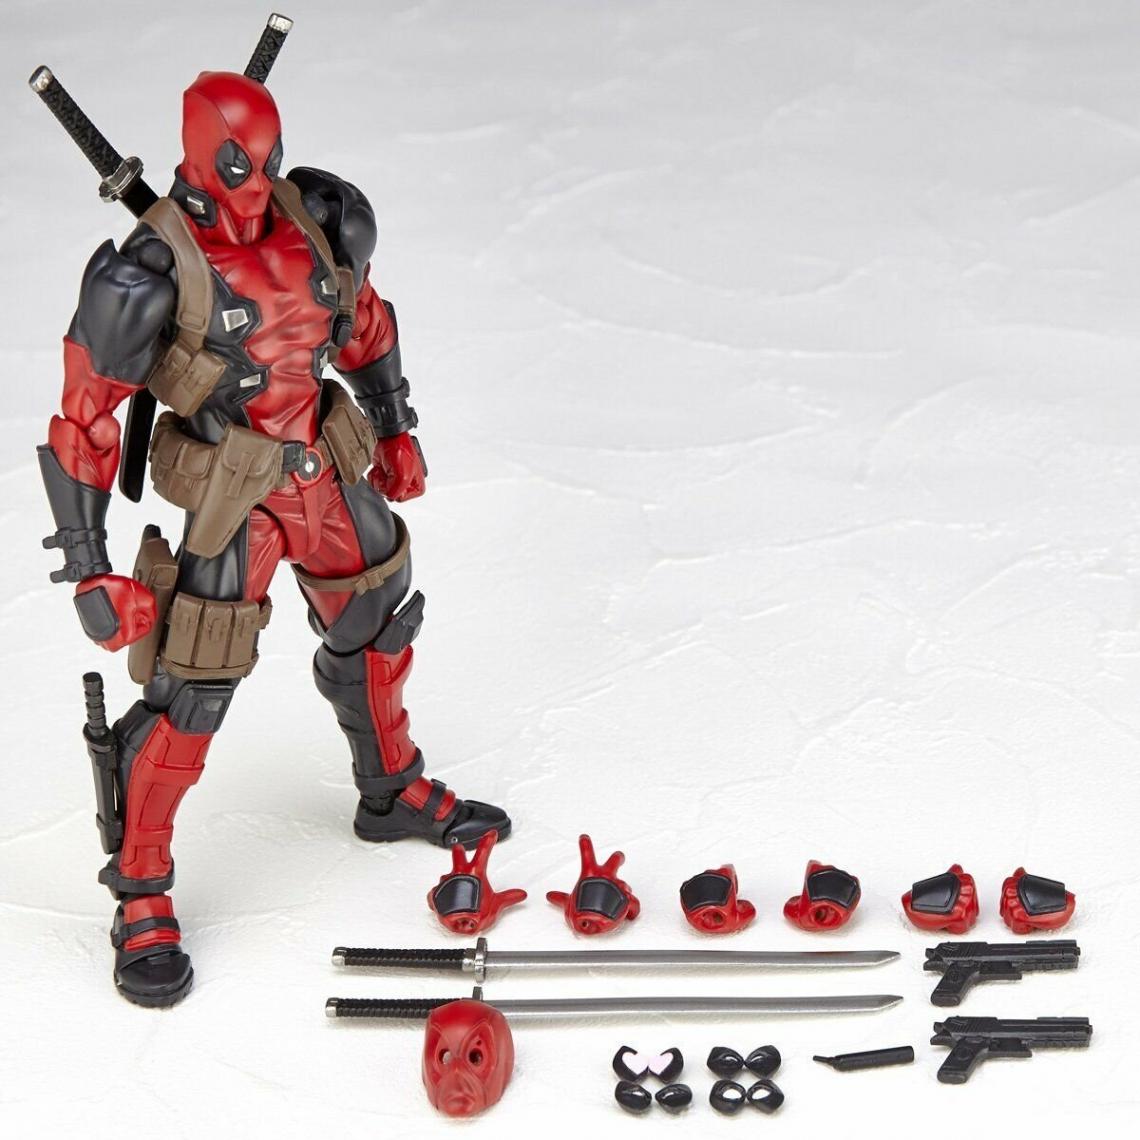 Universal - Deadpool Toy Picture.(Rouge) - Mangas